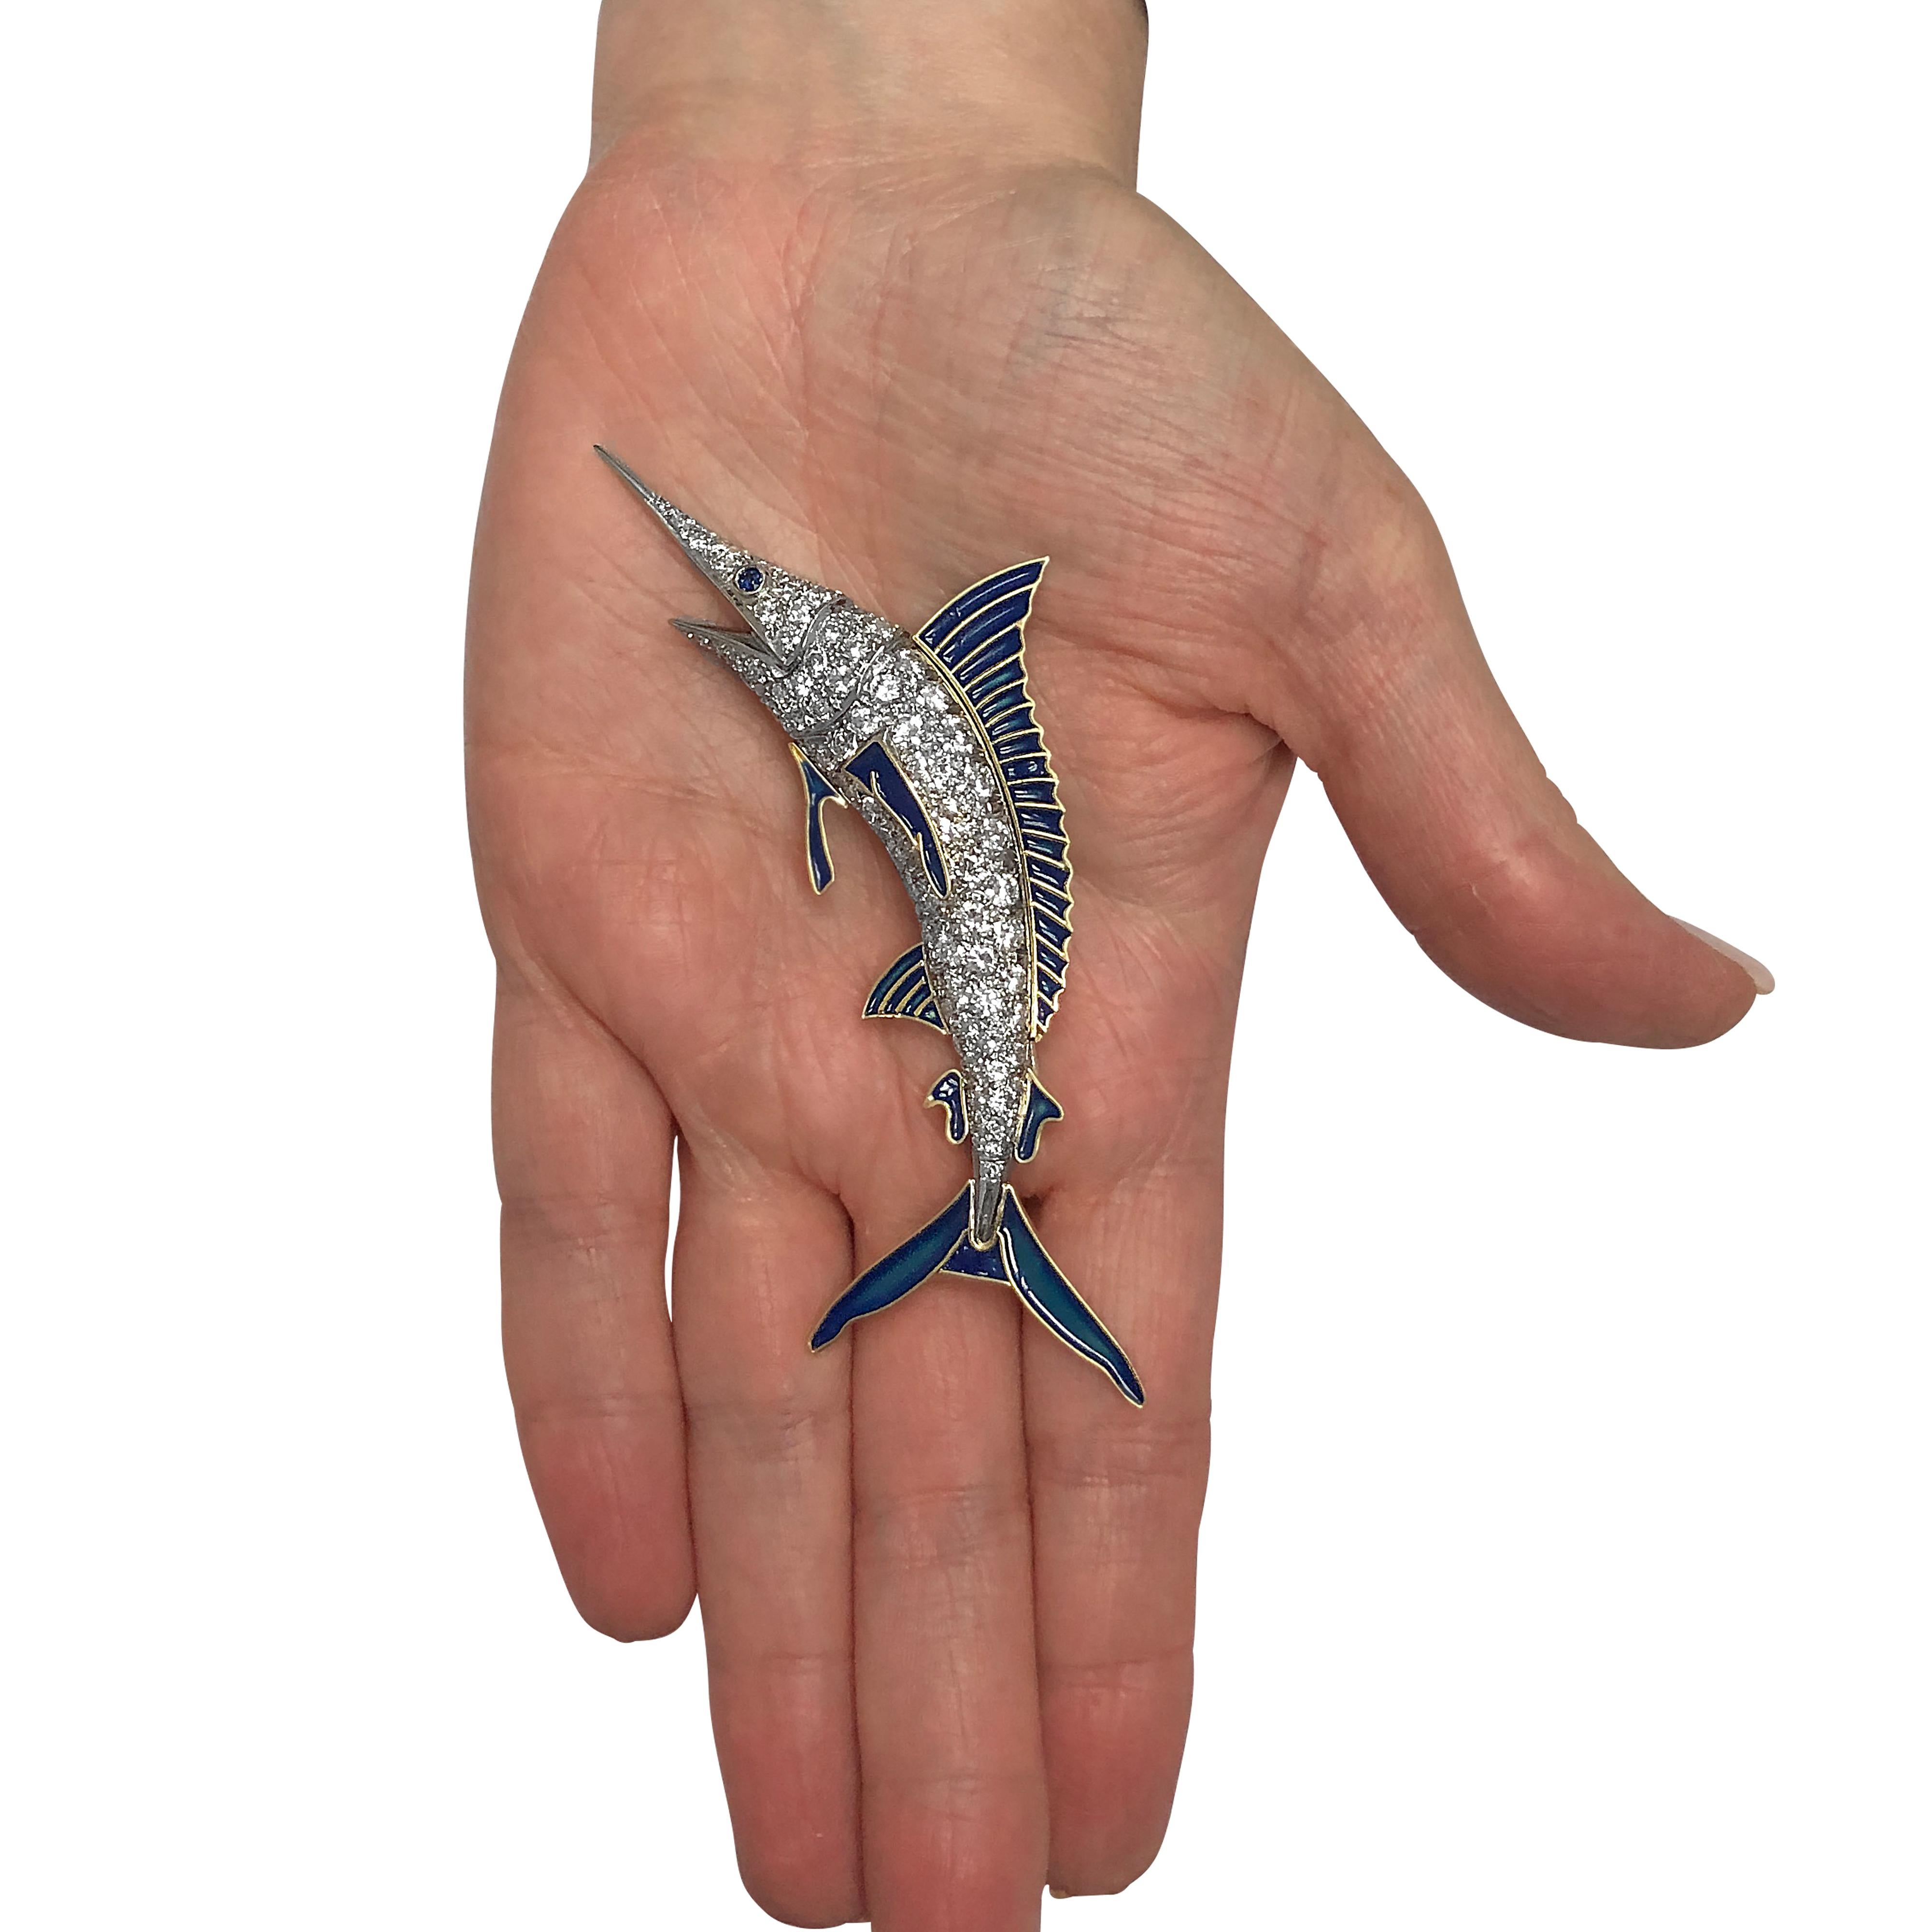 Delight in the catch of the day with this spectacular Blue Marlin brooch pin. Crafted in platinum with 18 karat yellow gold and blue enamel detail, this Blue Marlin is encrusted with round brilliant cut diamonds weighing approximately 11 carats